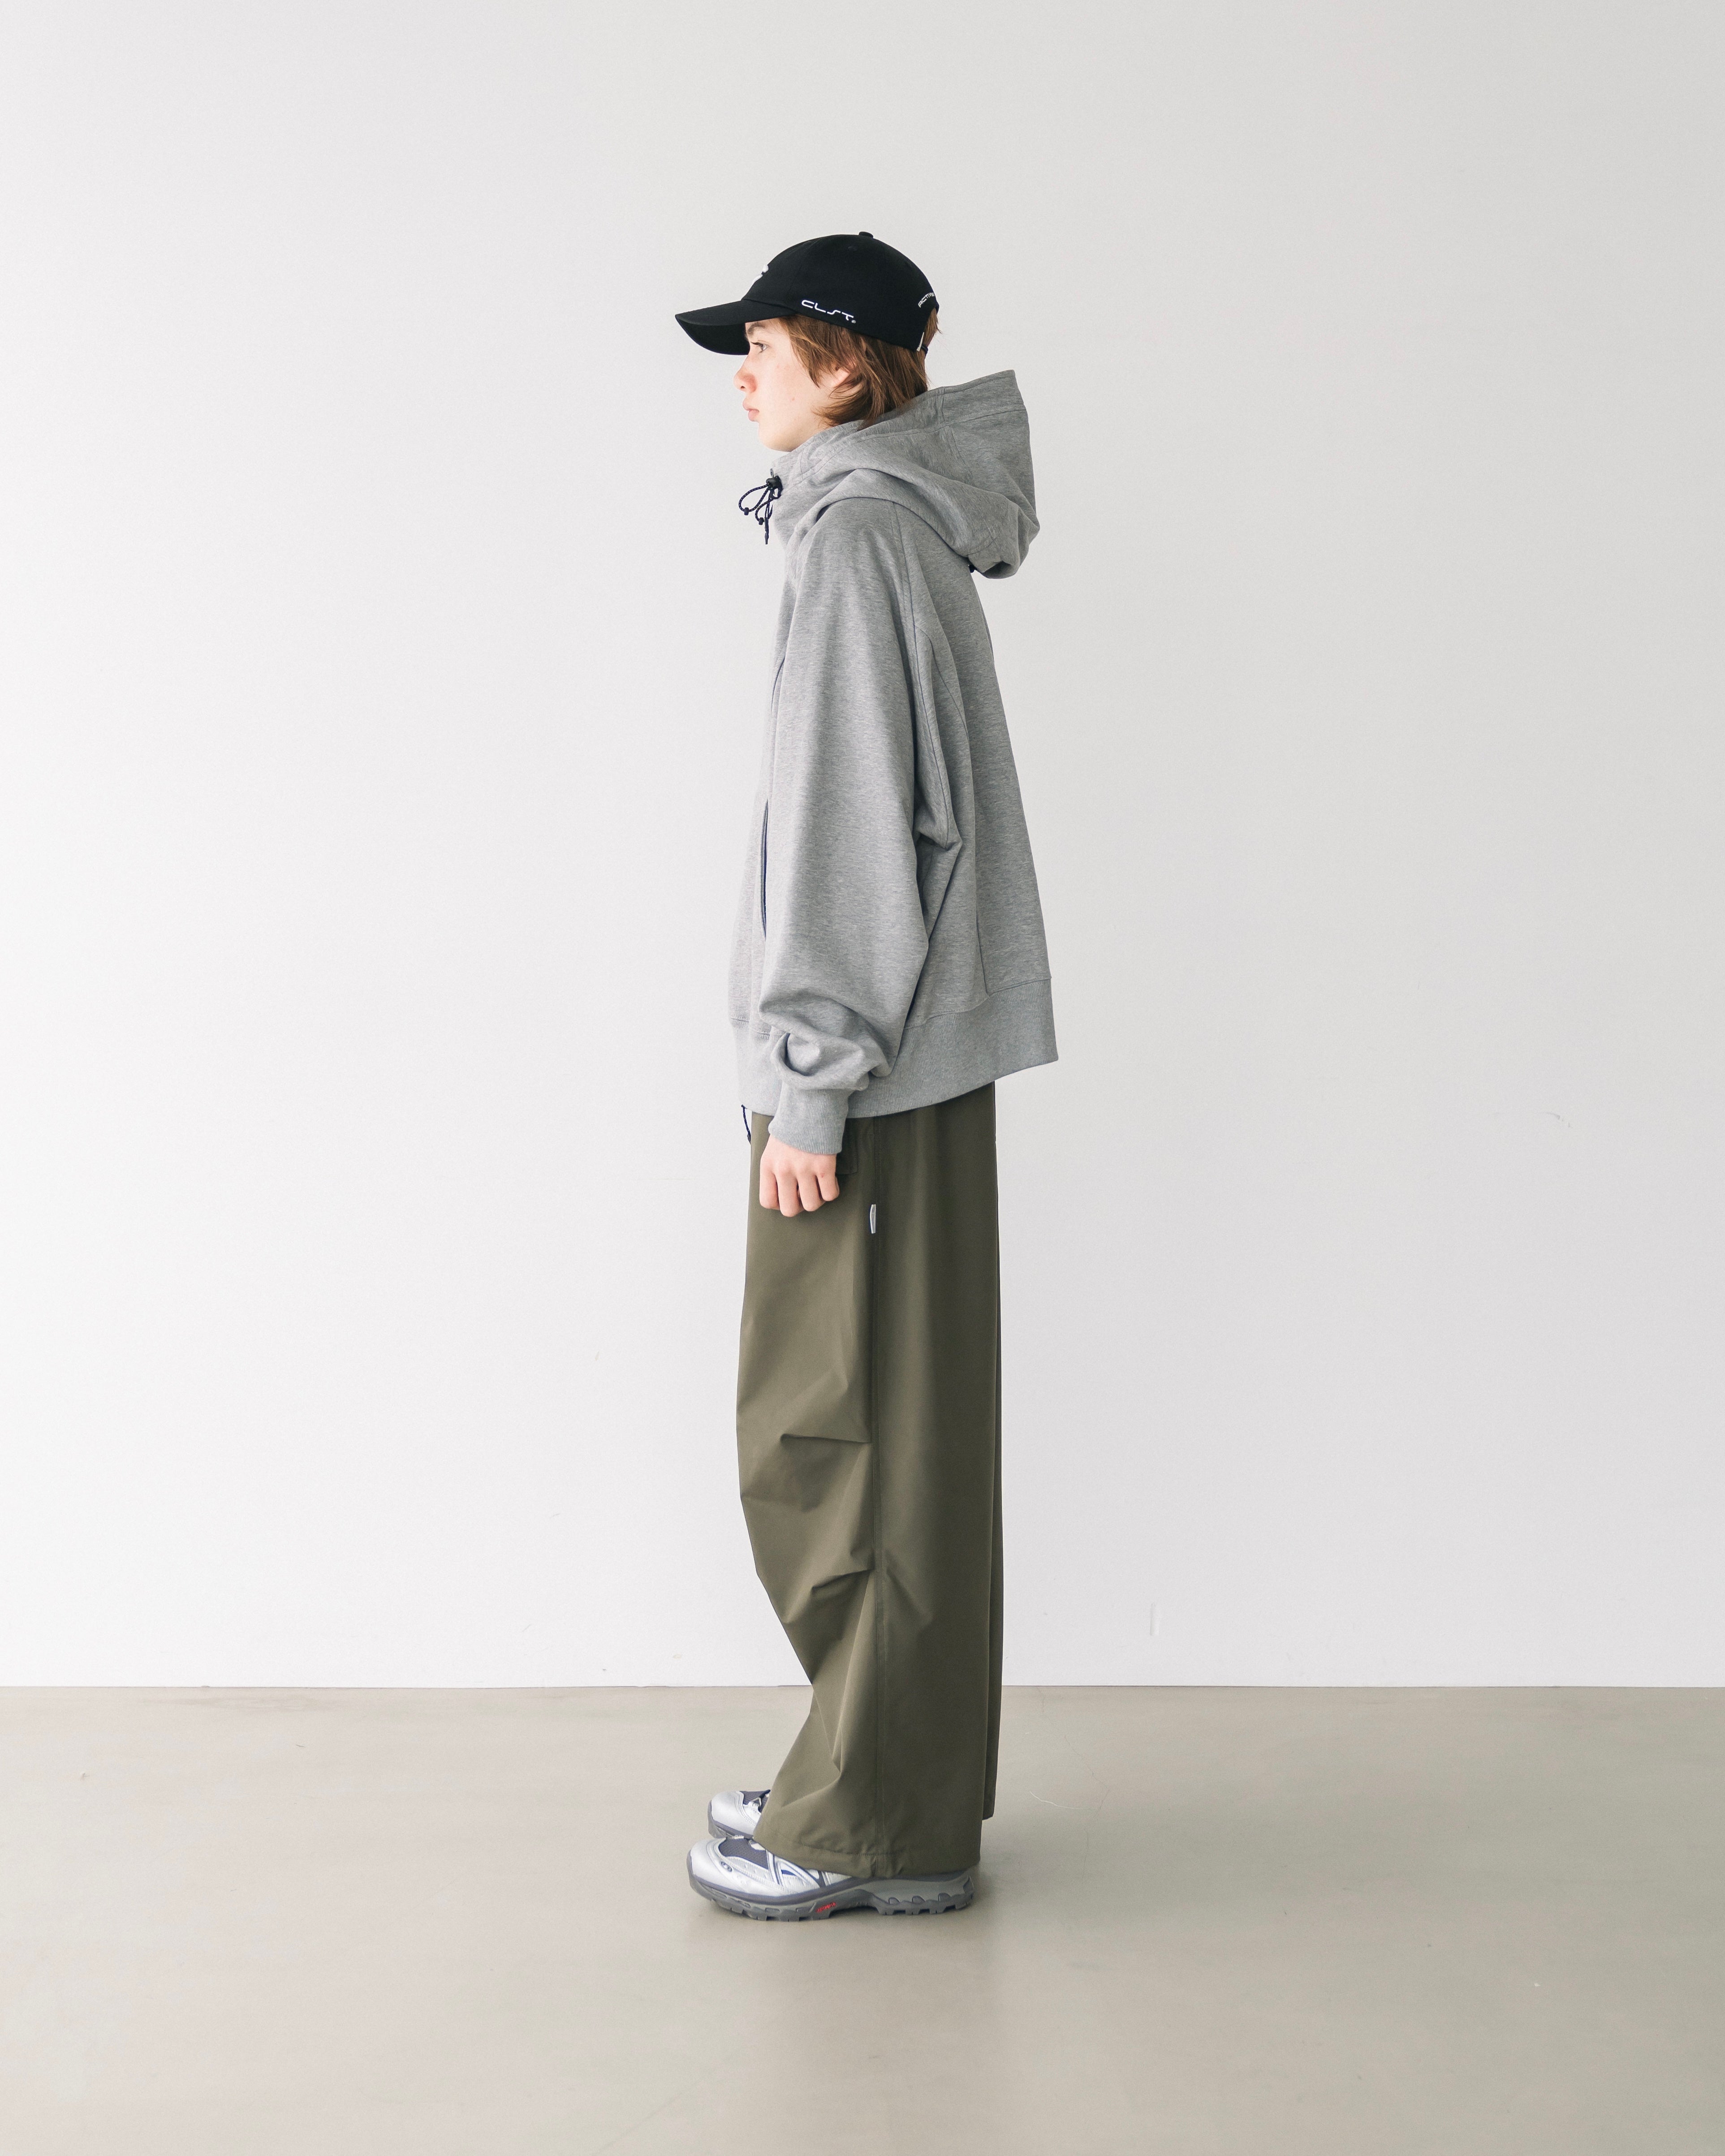 5.29 WED 20:00- IN STOCK】+phenix WINDSTOPPER® by GORE-TEX LABS CITY O